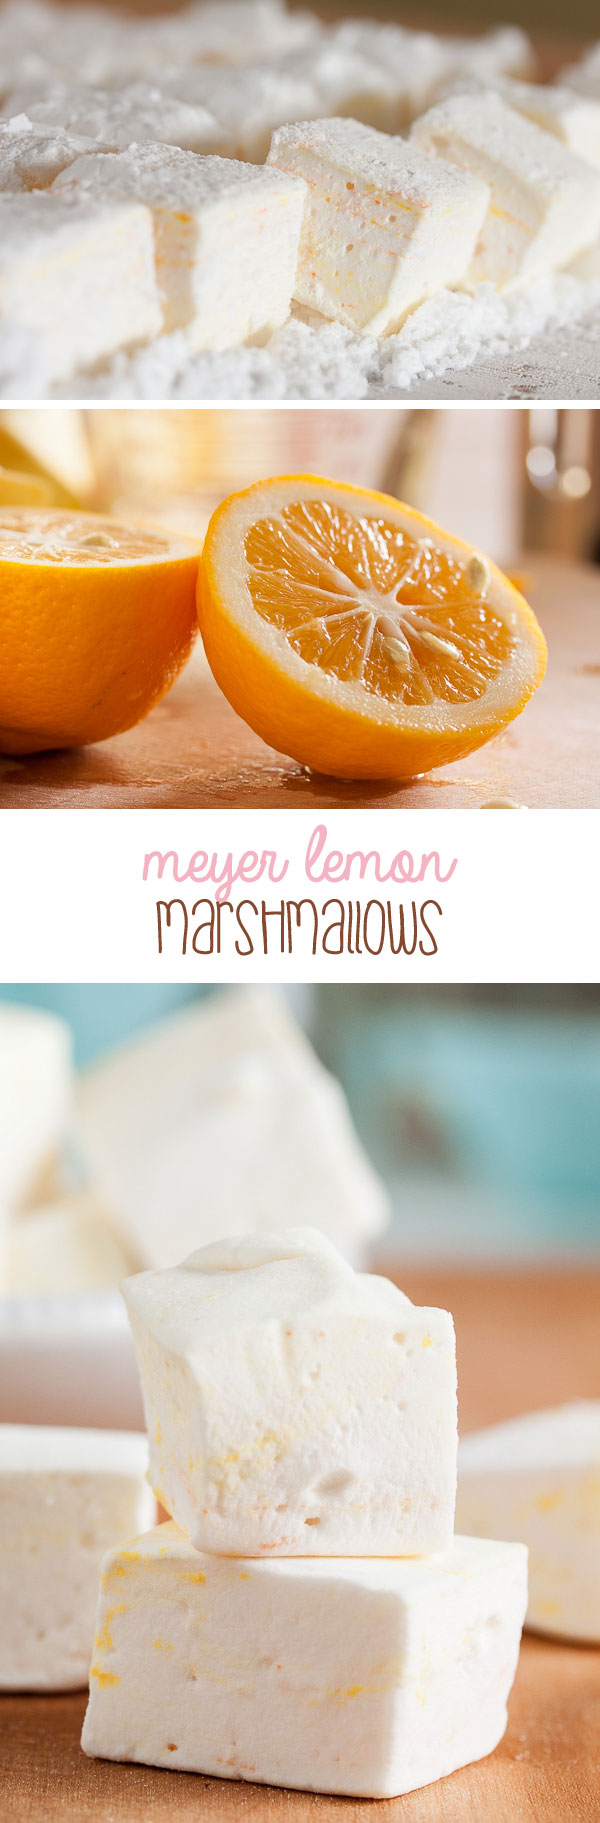 These Meyer Lemon Marshmallows are soft and fluffy and taste like a lemon meringue pie. They're better than anything store-bought, and not hard to make.